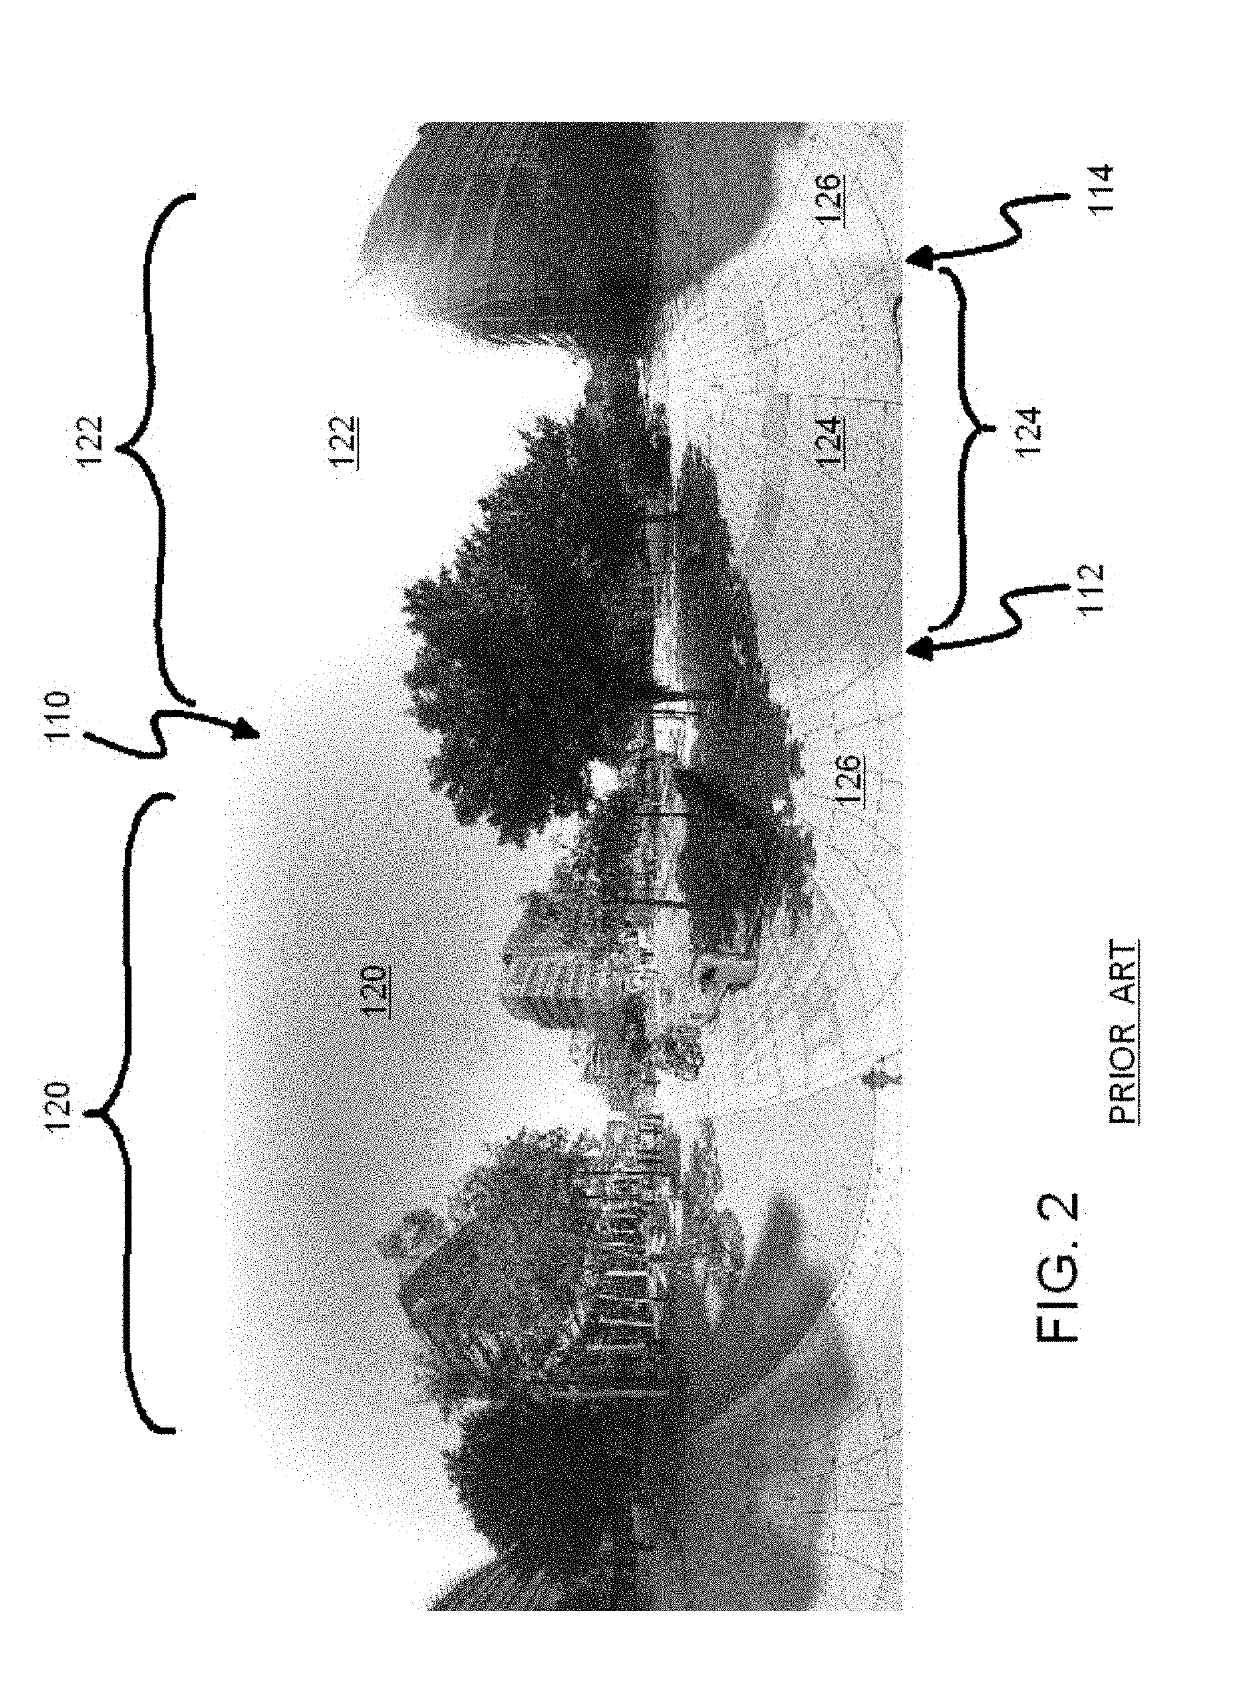 Method for High-Quality Panorama Generation with Color, Luminance, and Sharpness Balancing